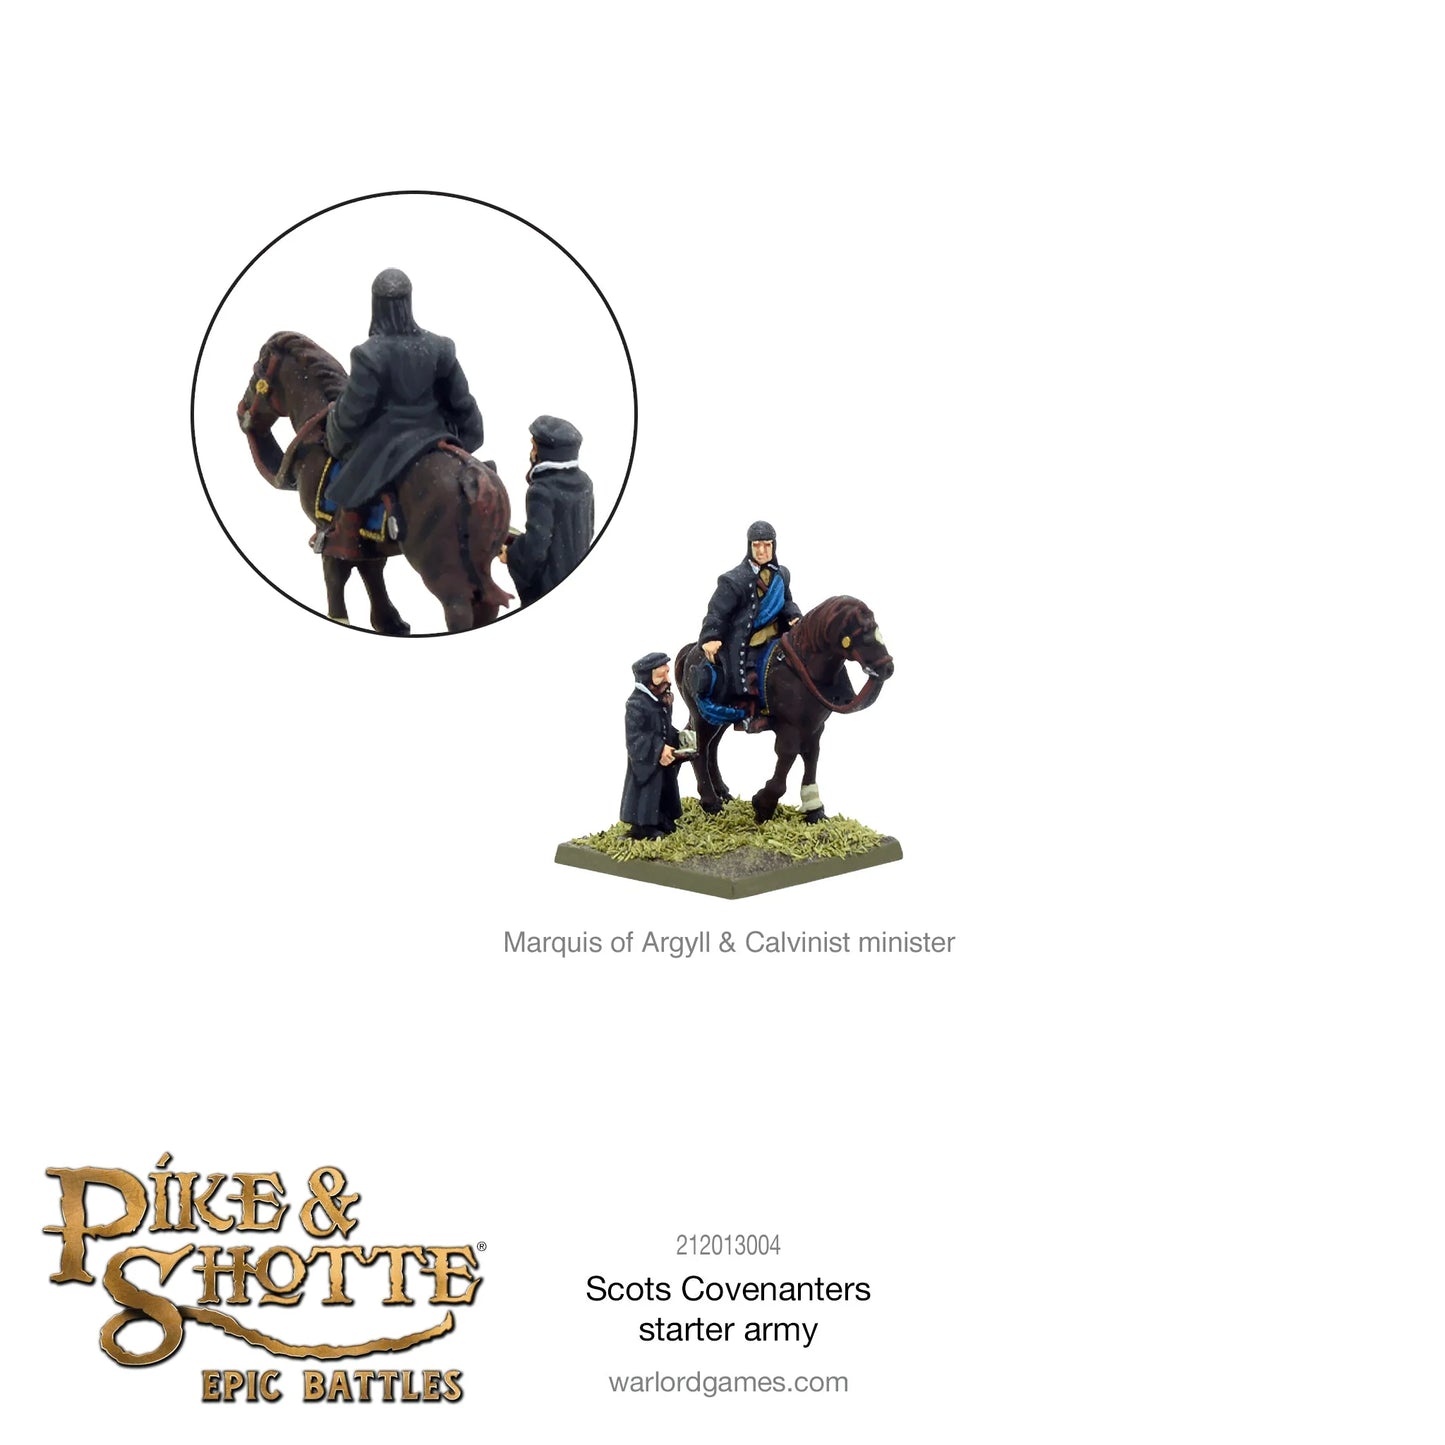 Pike & Shotte Epic Battles - Scots Covenanters Starter Army